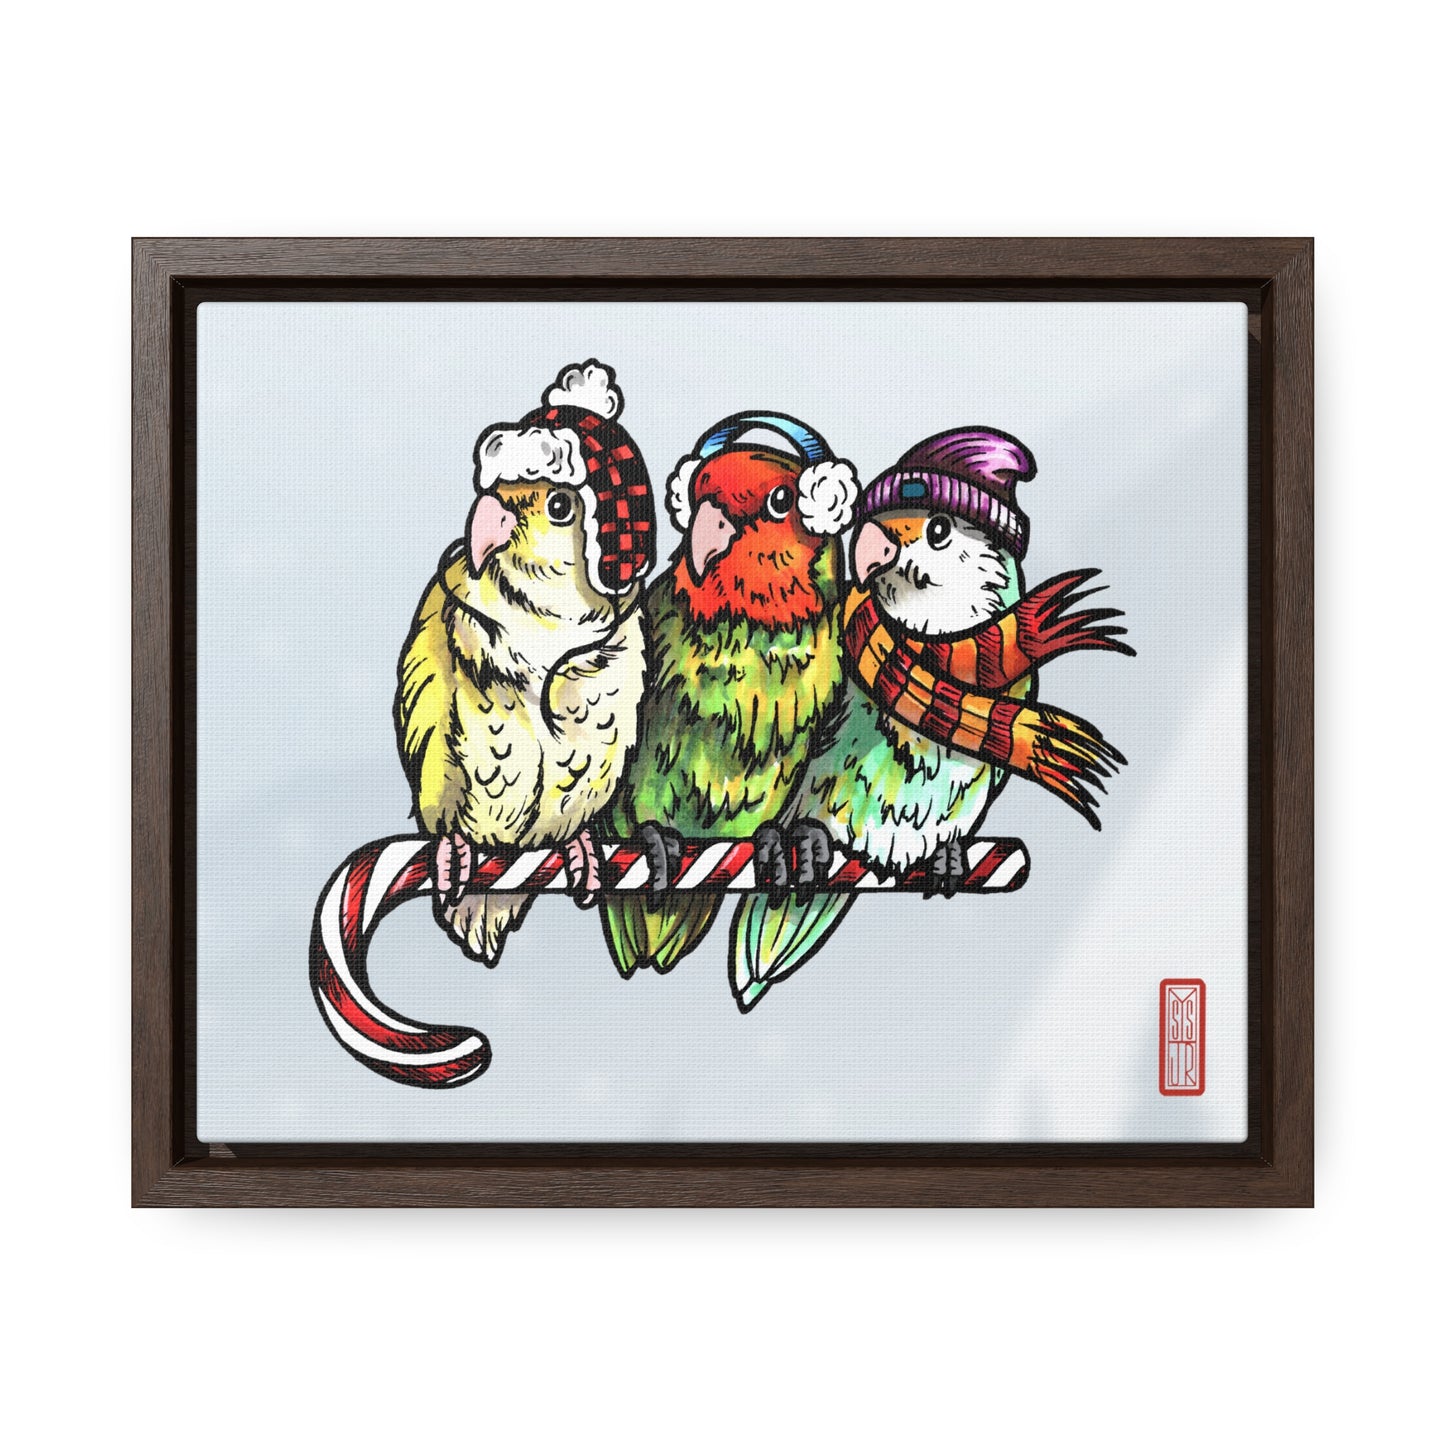 3 Lovebirds with Winter Wear & Perched on a Candy Cane, Framed Canvas Wrap Wall Art